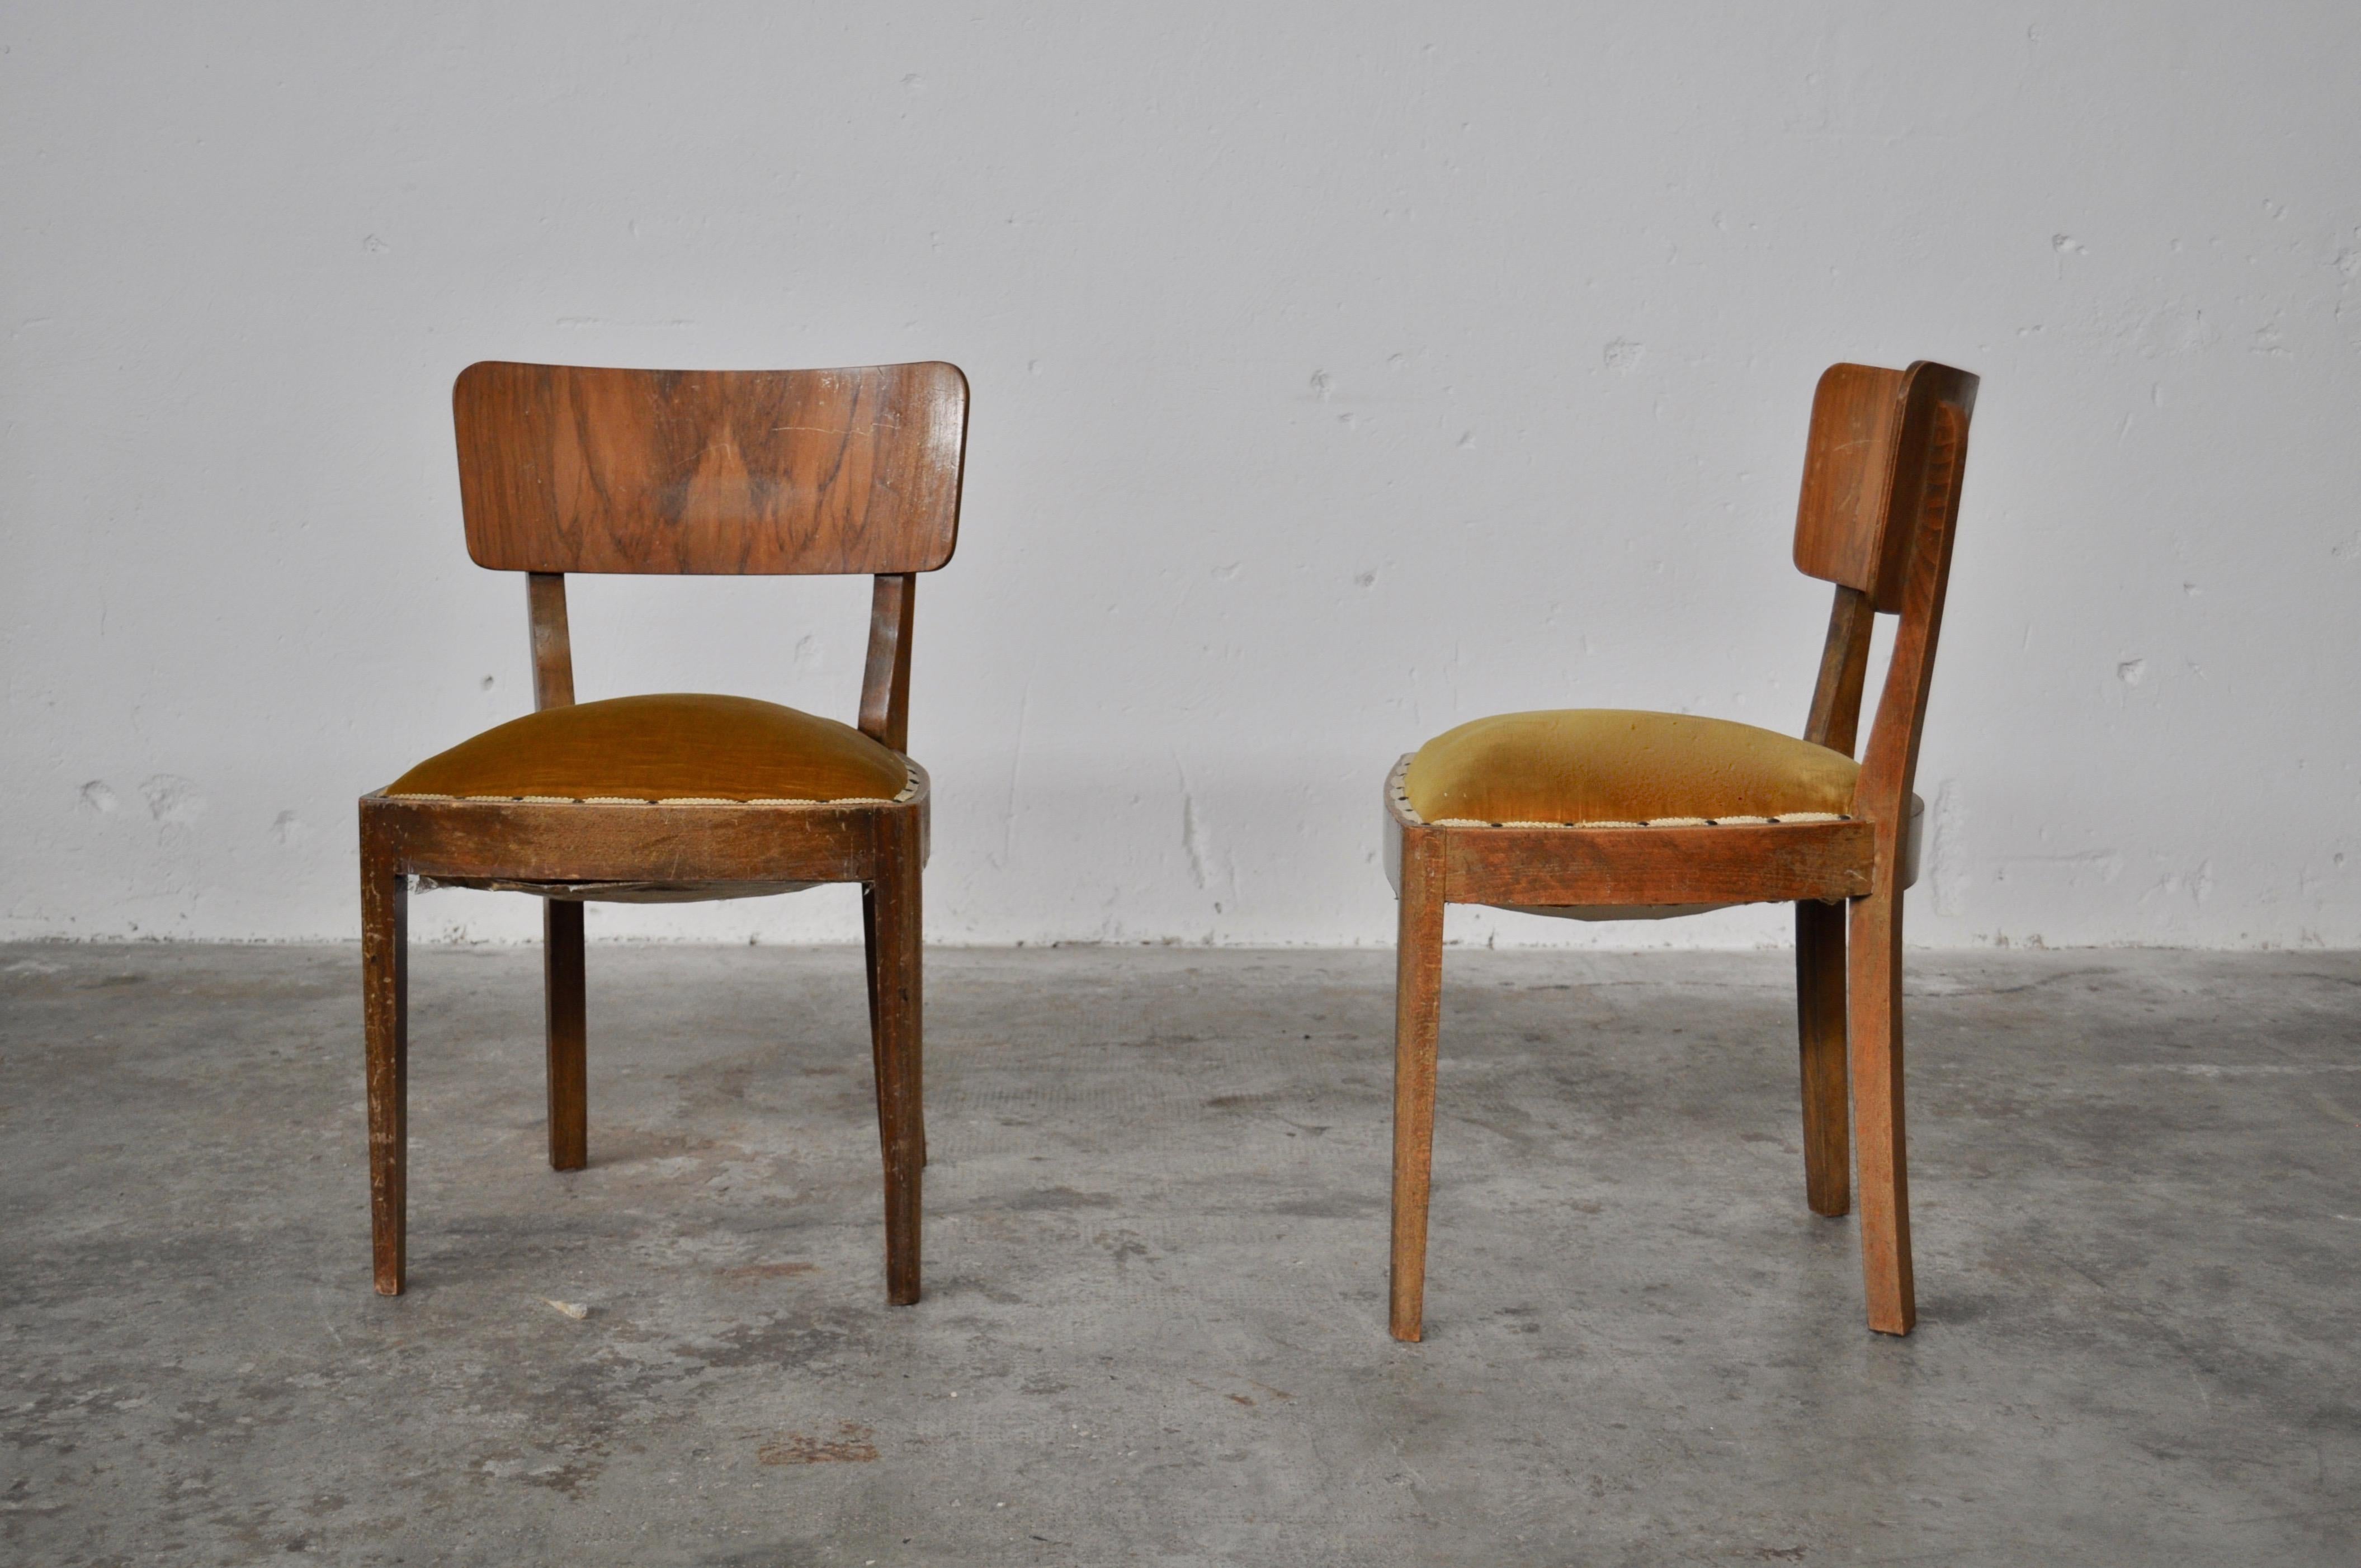 Vintage Walnut Chairs with Studs & Straps and Springs in Velvet, Italy, 1920s, Set of 2